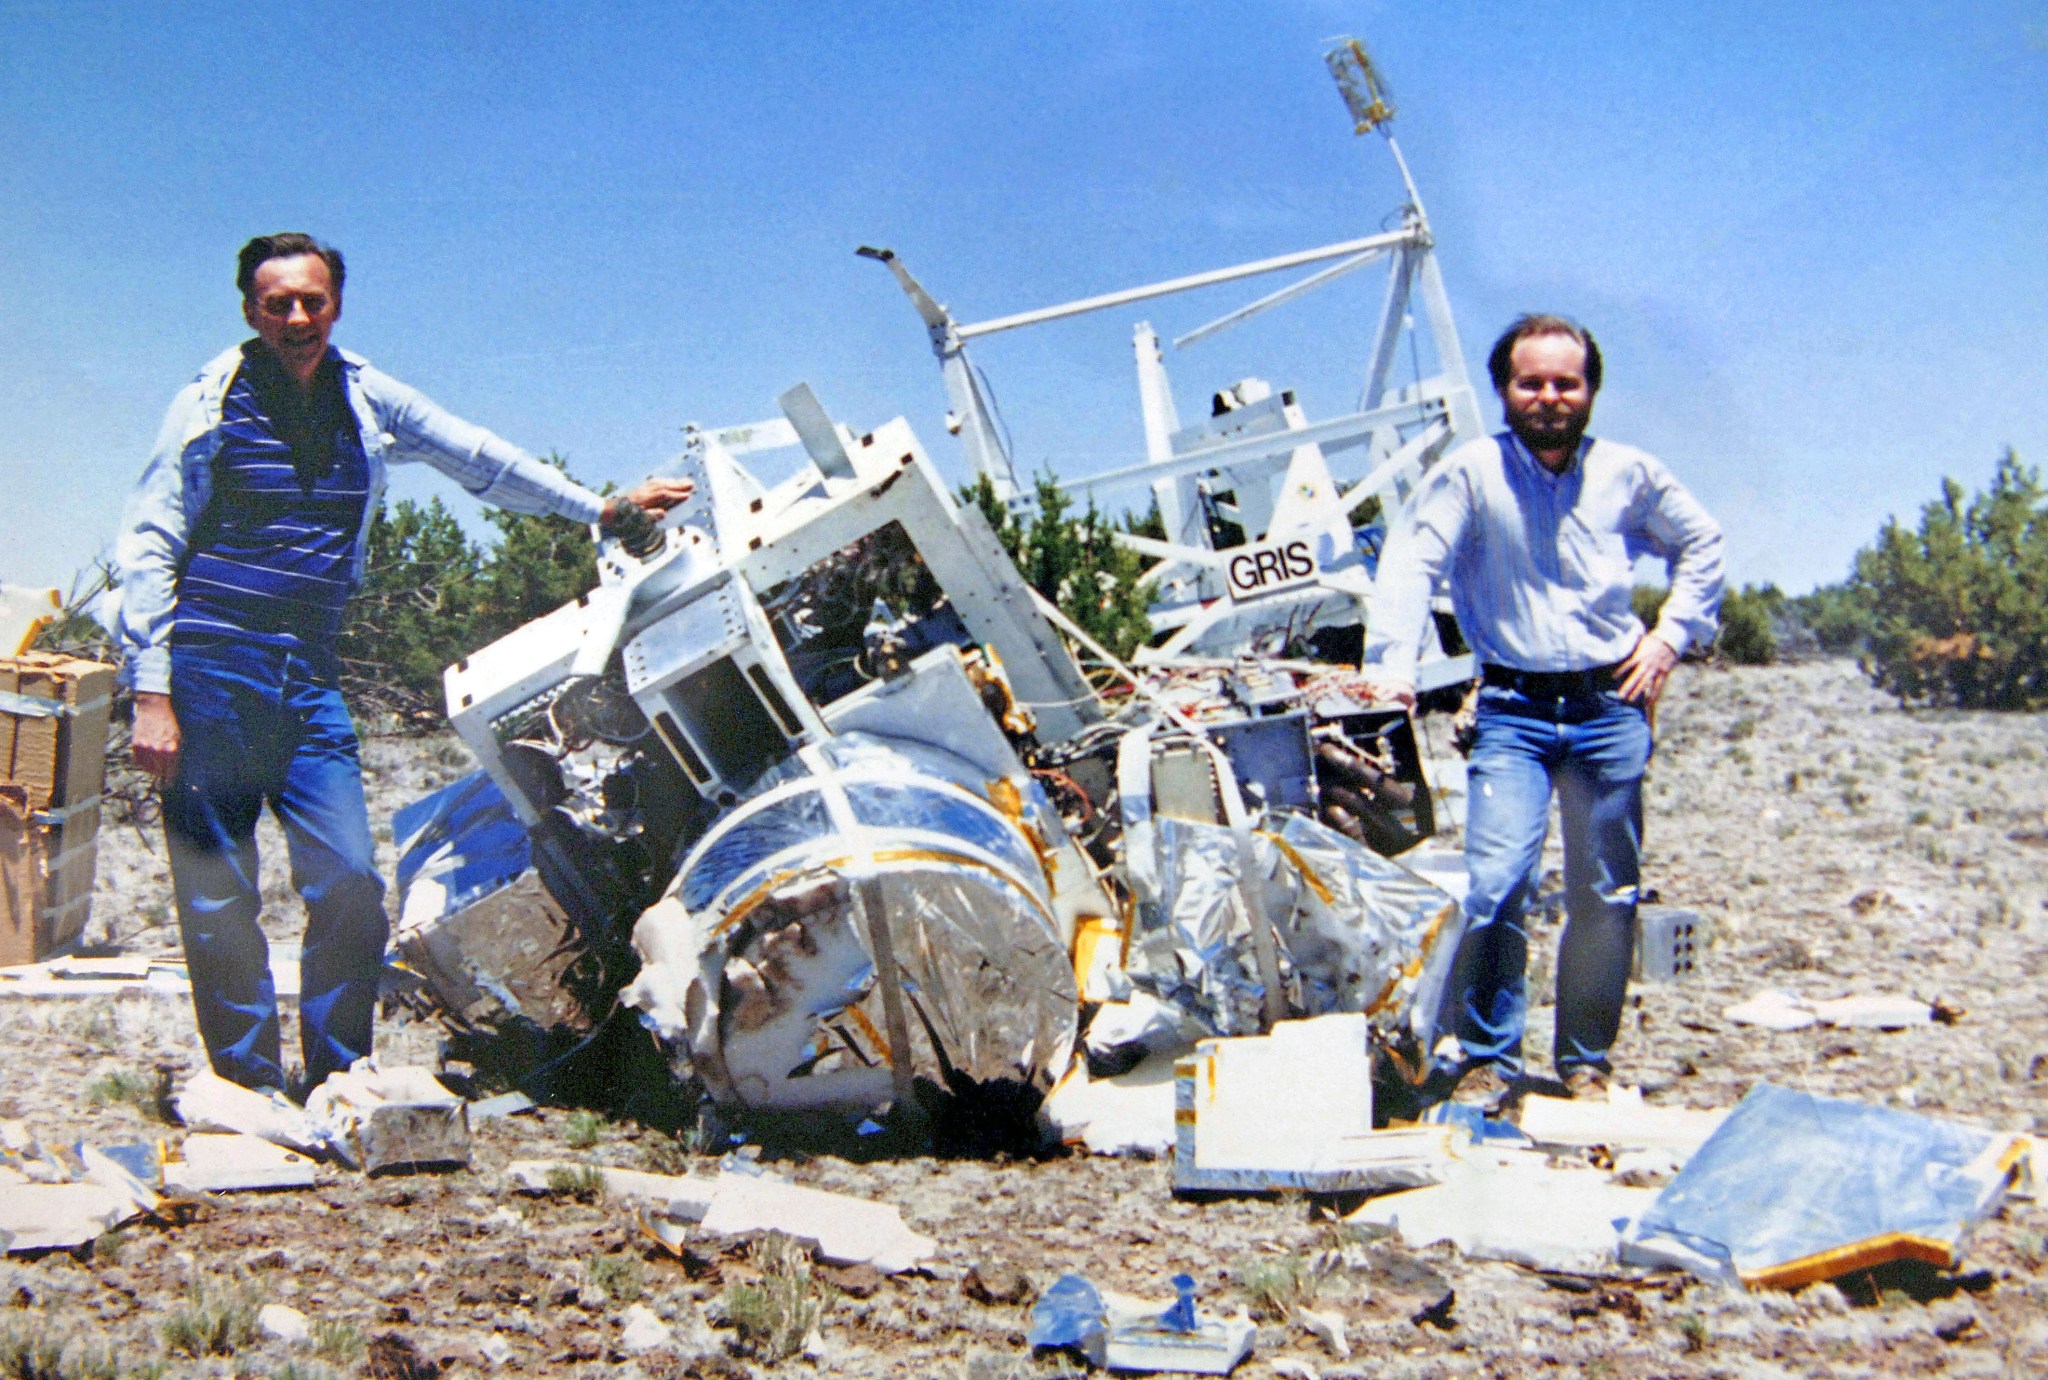 Two men flank a pile of white and silver wreckage on which the word "GRIS" is visible.